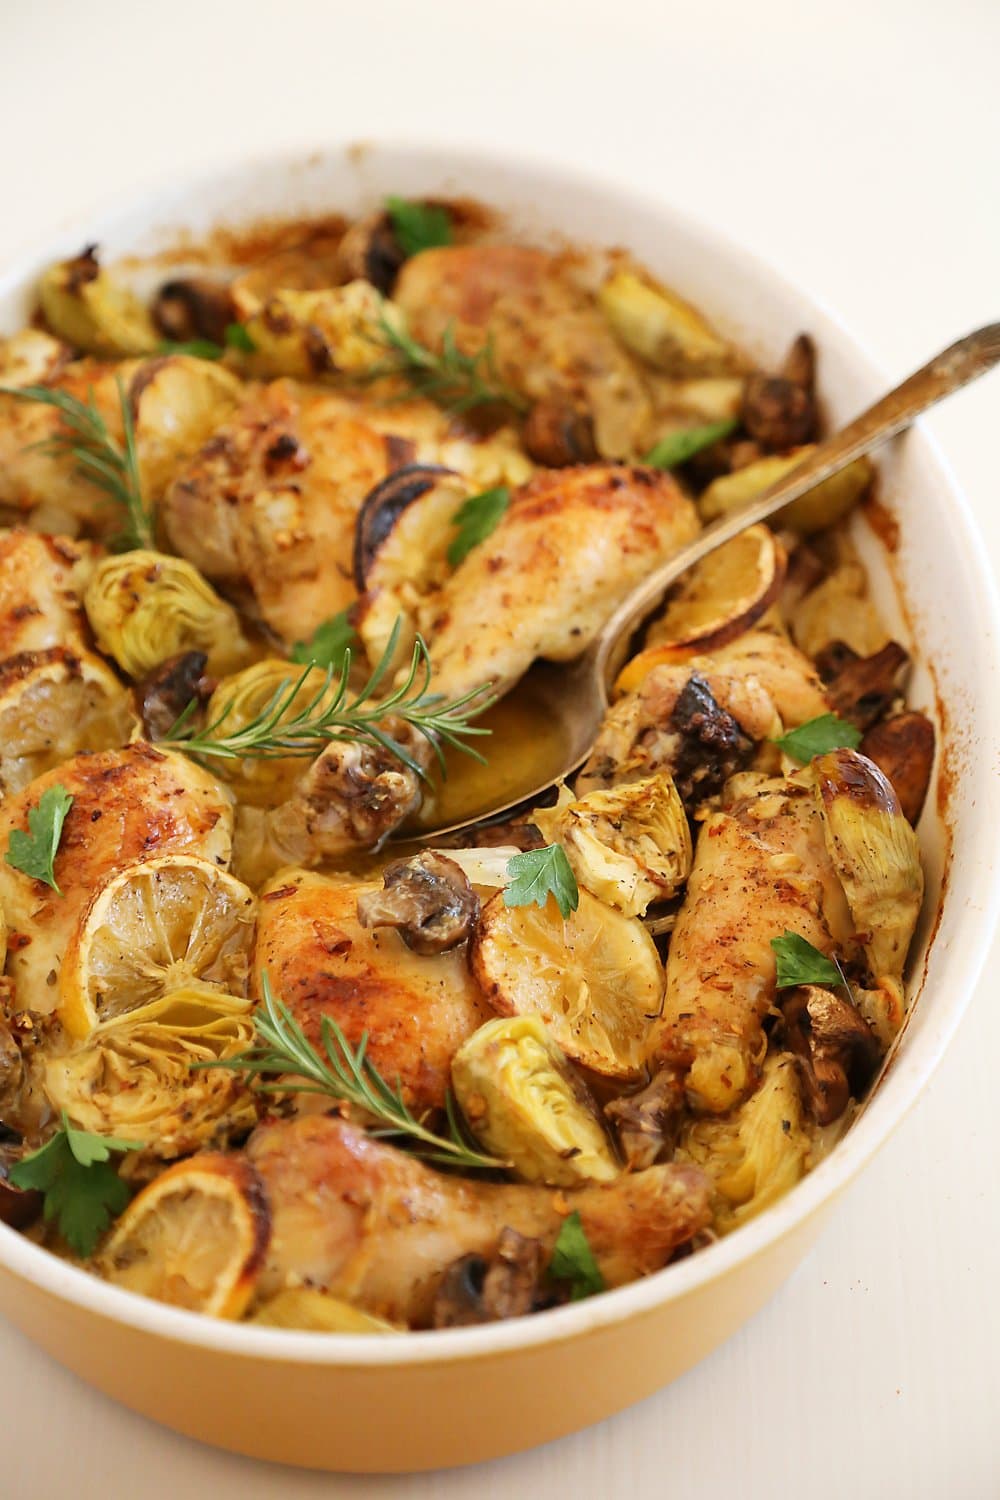 Oven roasted chicken with artichoke hearts, mushrooms and lemons in an oval dish.